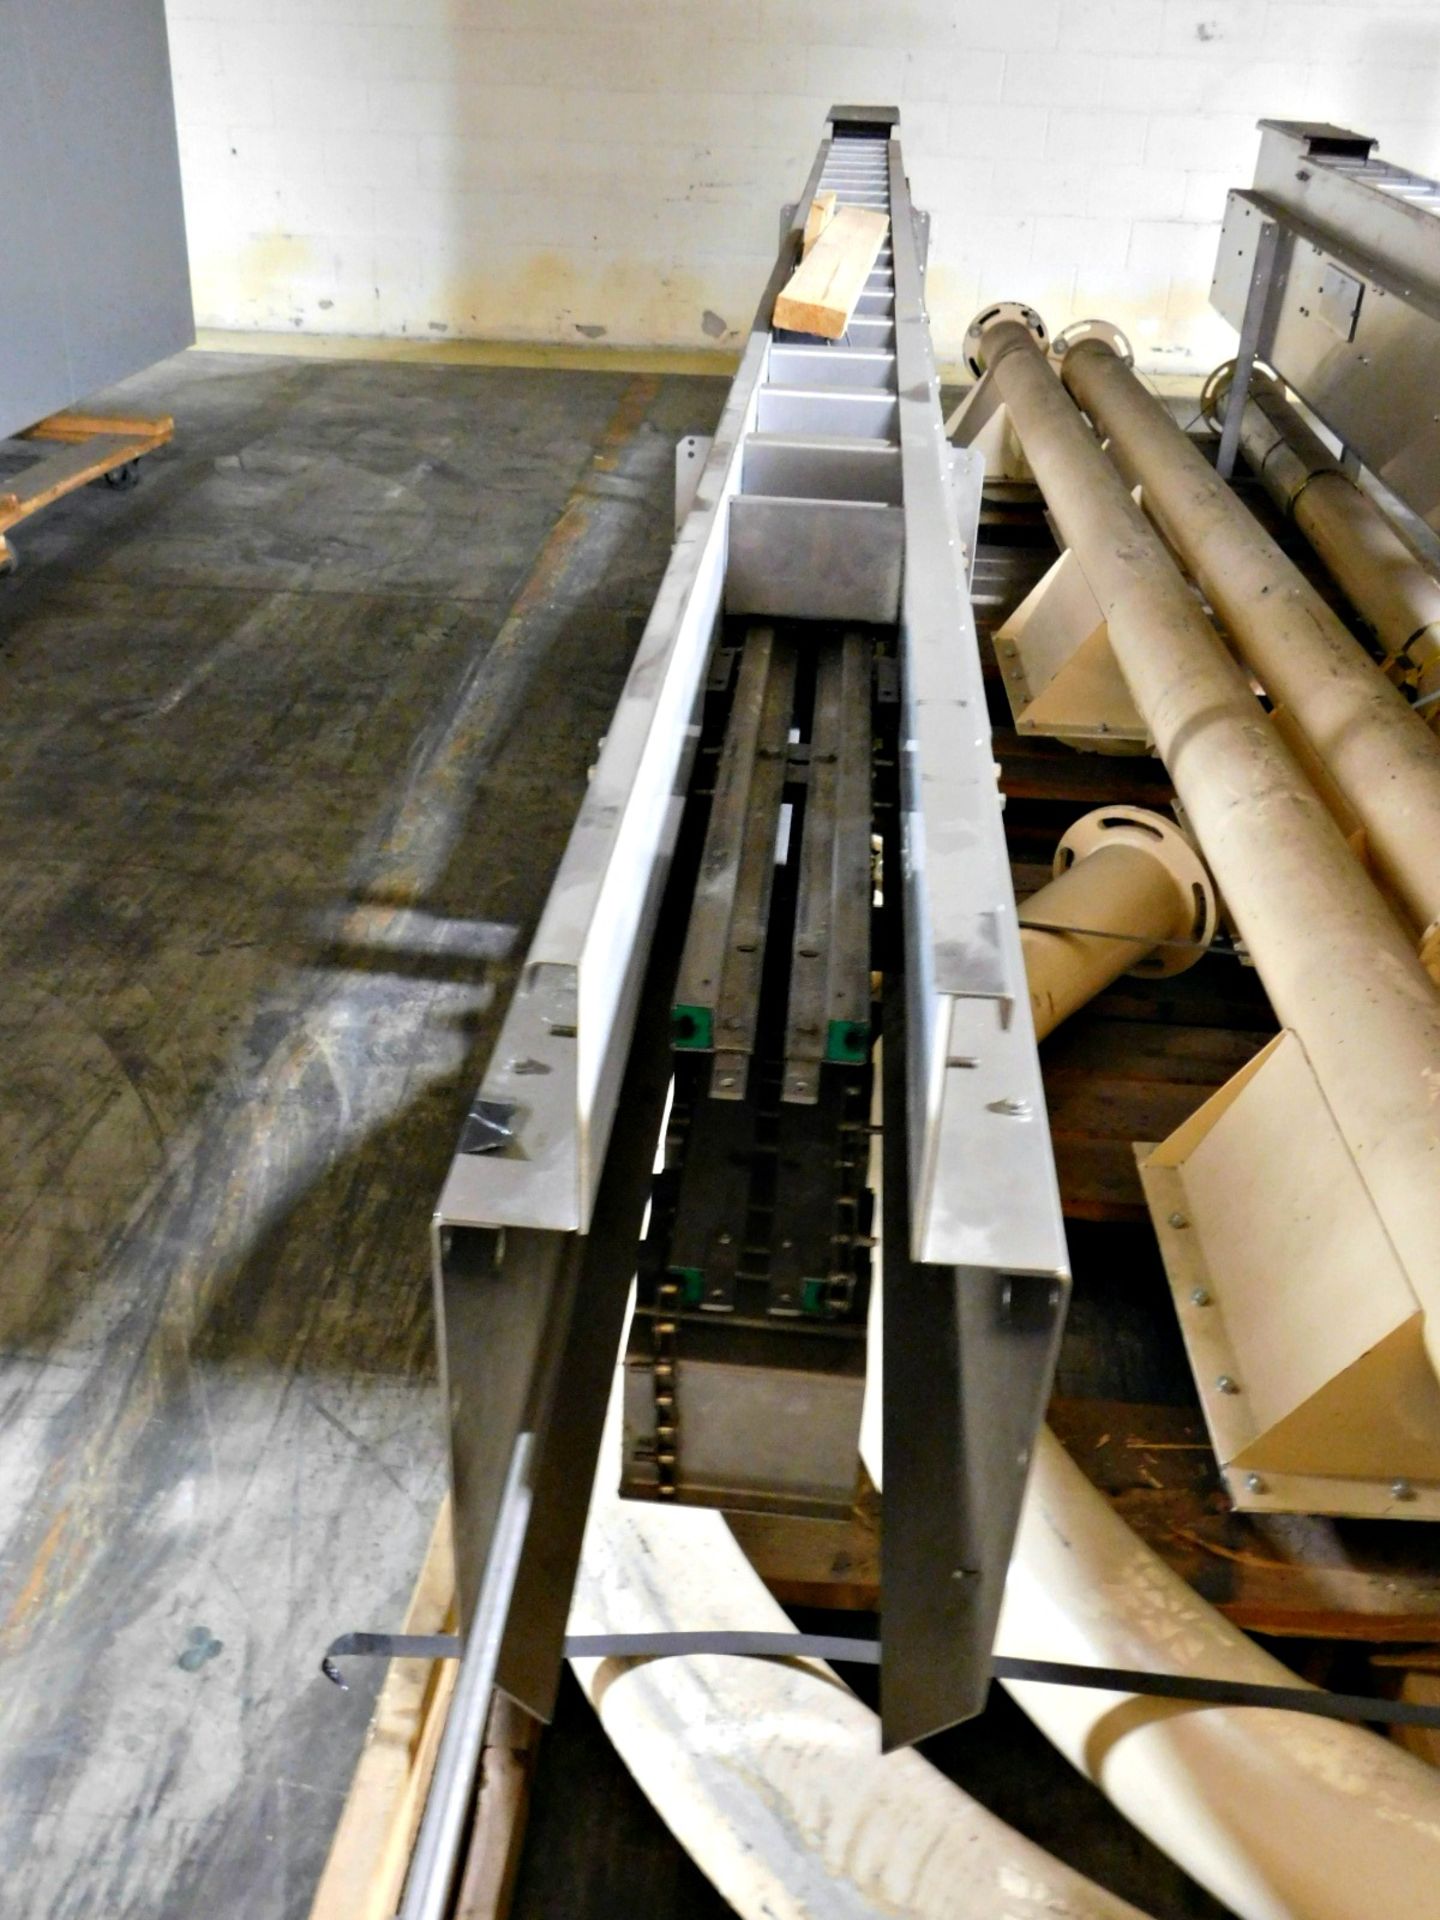 Stainless steel conveyor 17' 2" x 5" qty 2 & pipes :equipment located at Clark Logistic Services | - Image 5 of 5